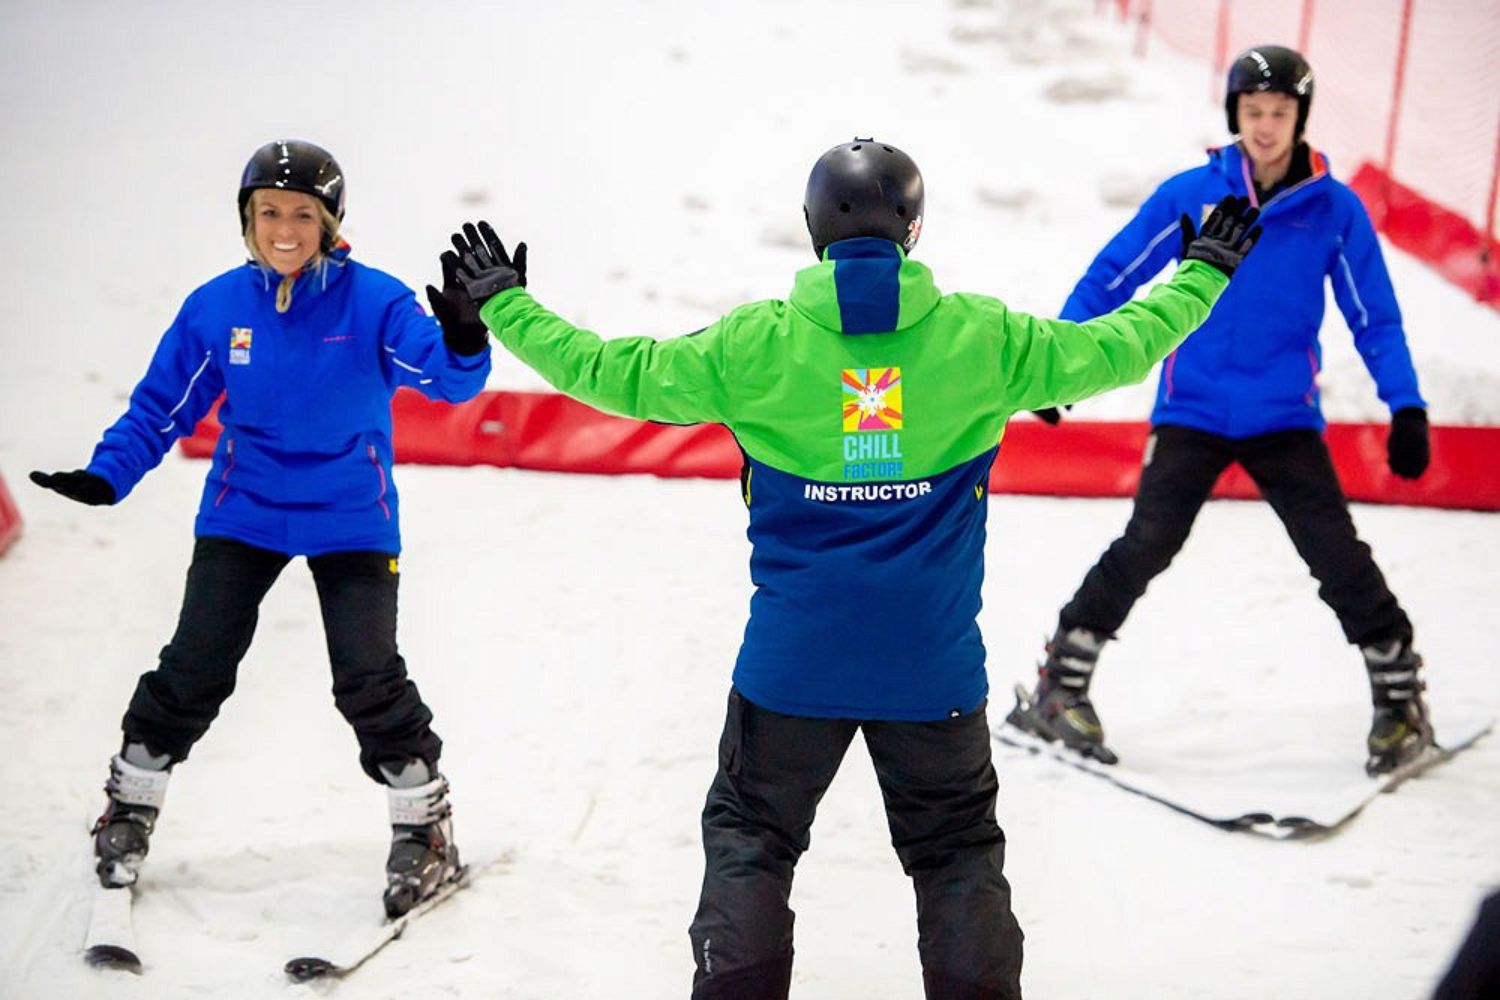 Chill Factore instructor teaching indoor skiing - Chill Factore, Manchester